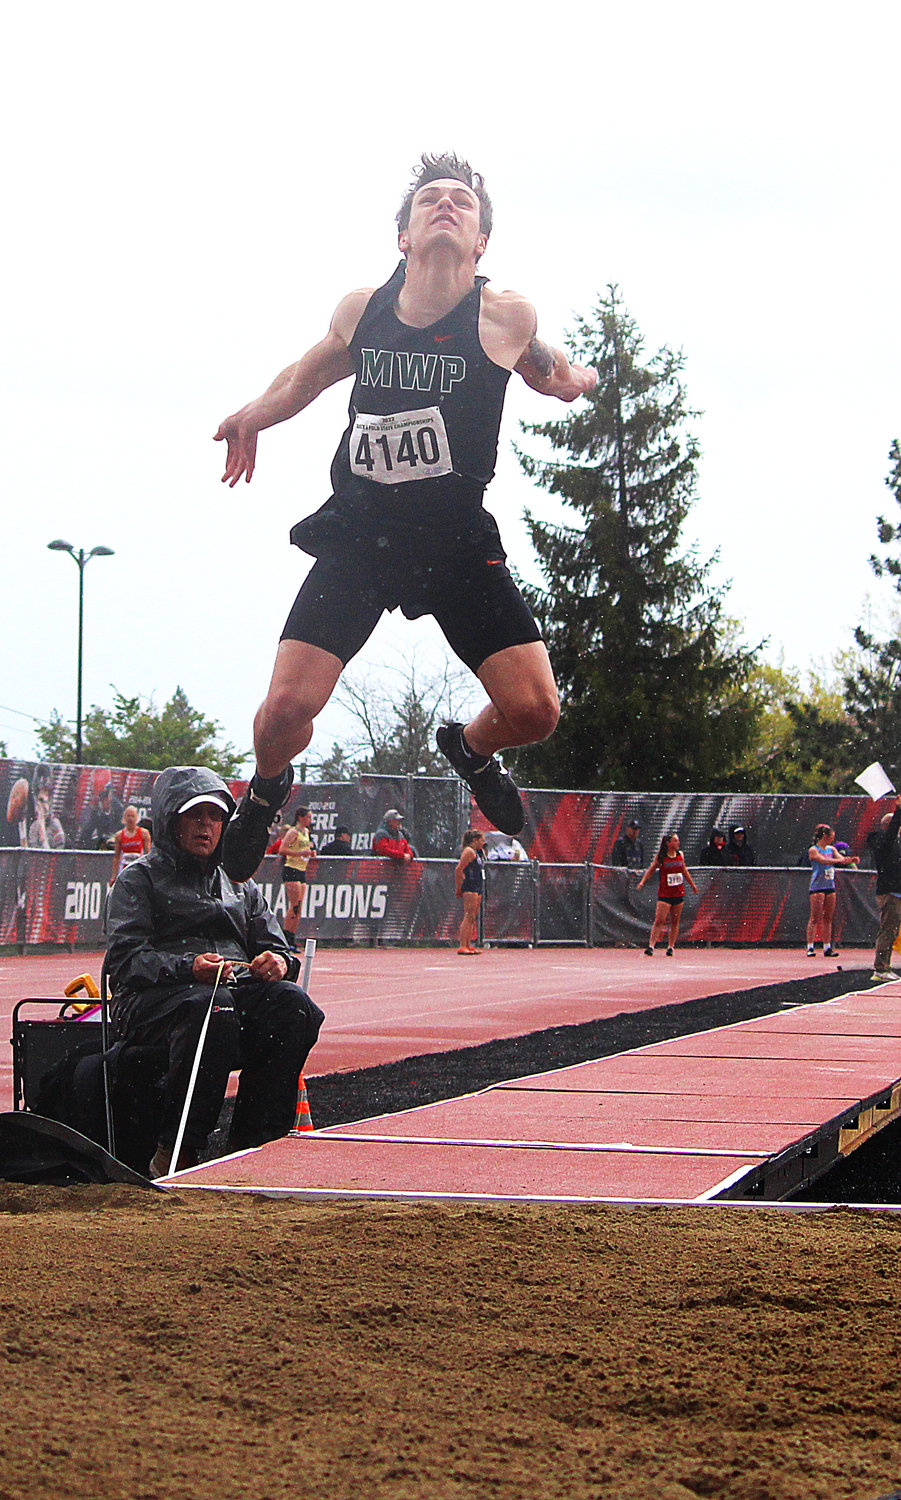 Morton White Pass' Kysen Collette makes an attempt during the boys long jump finals during the State 1B/2B/1A Track and Field Championships in Cheney, Washington on May 27, 2022.